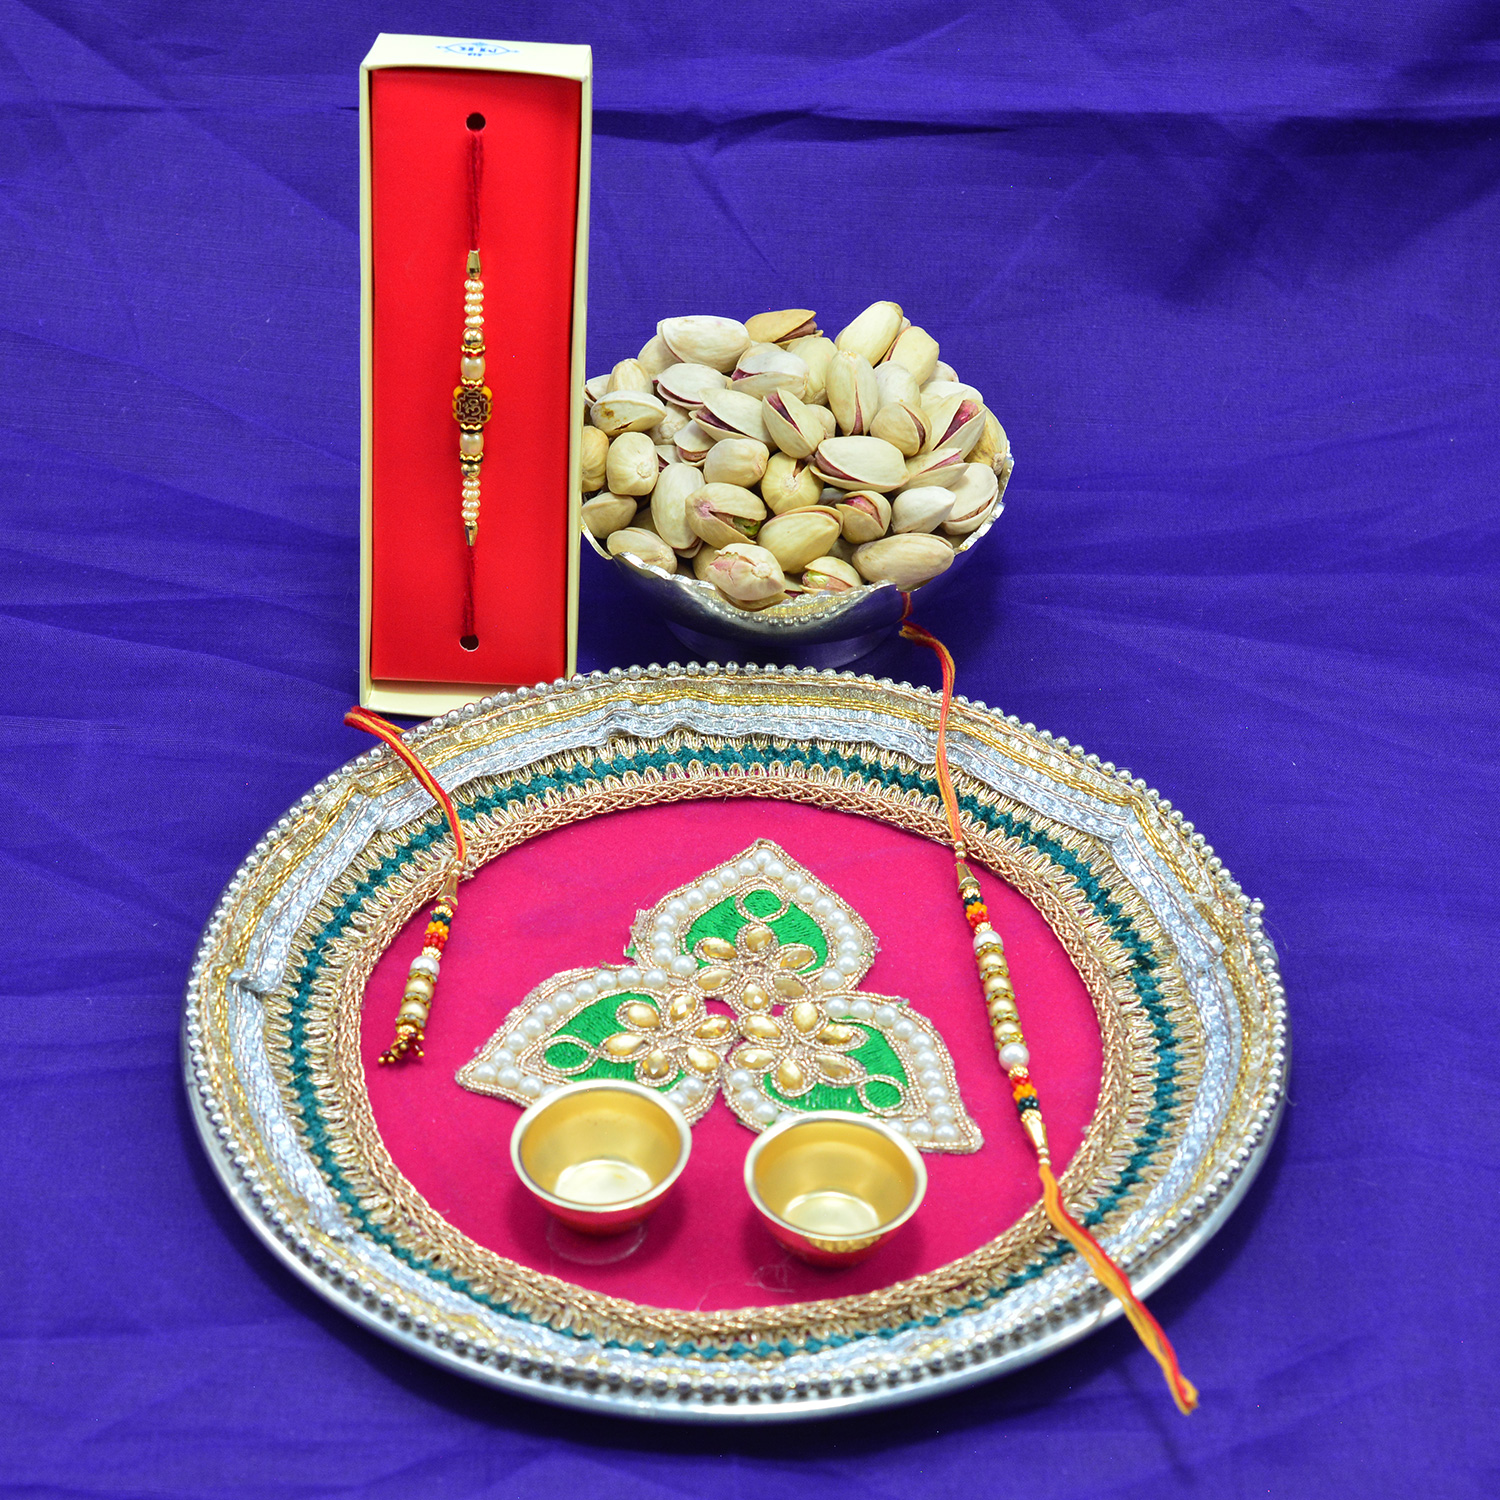 Pistachios Fresh Branded Dry Fruits with Amazing Looking Handcrafted Rakhi Pooja Thali